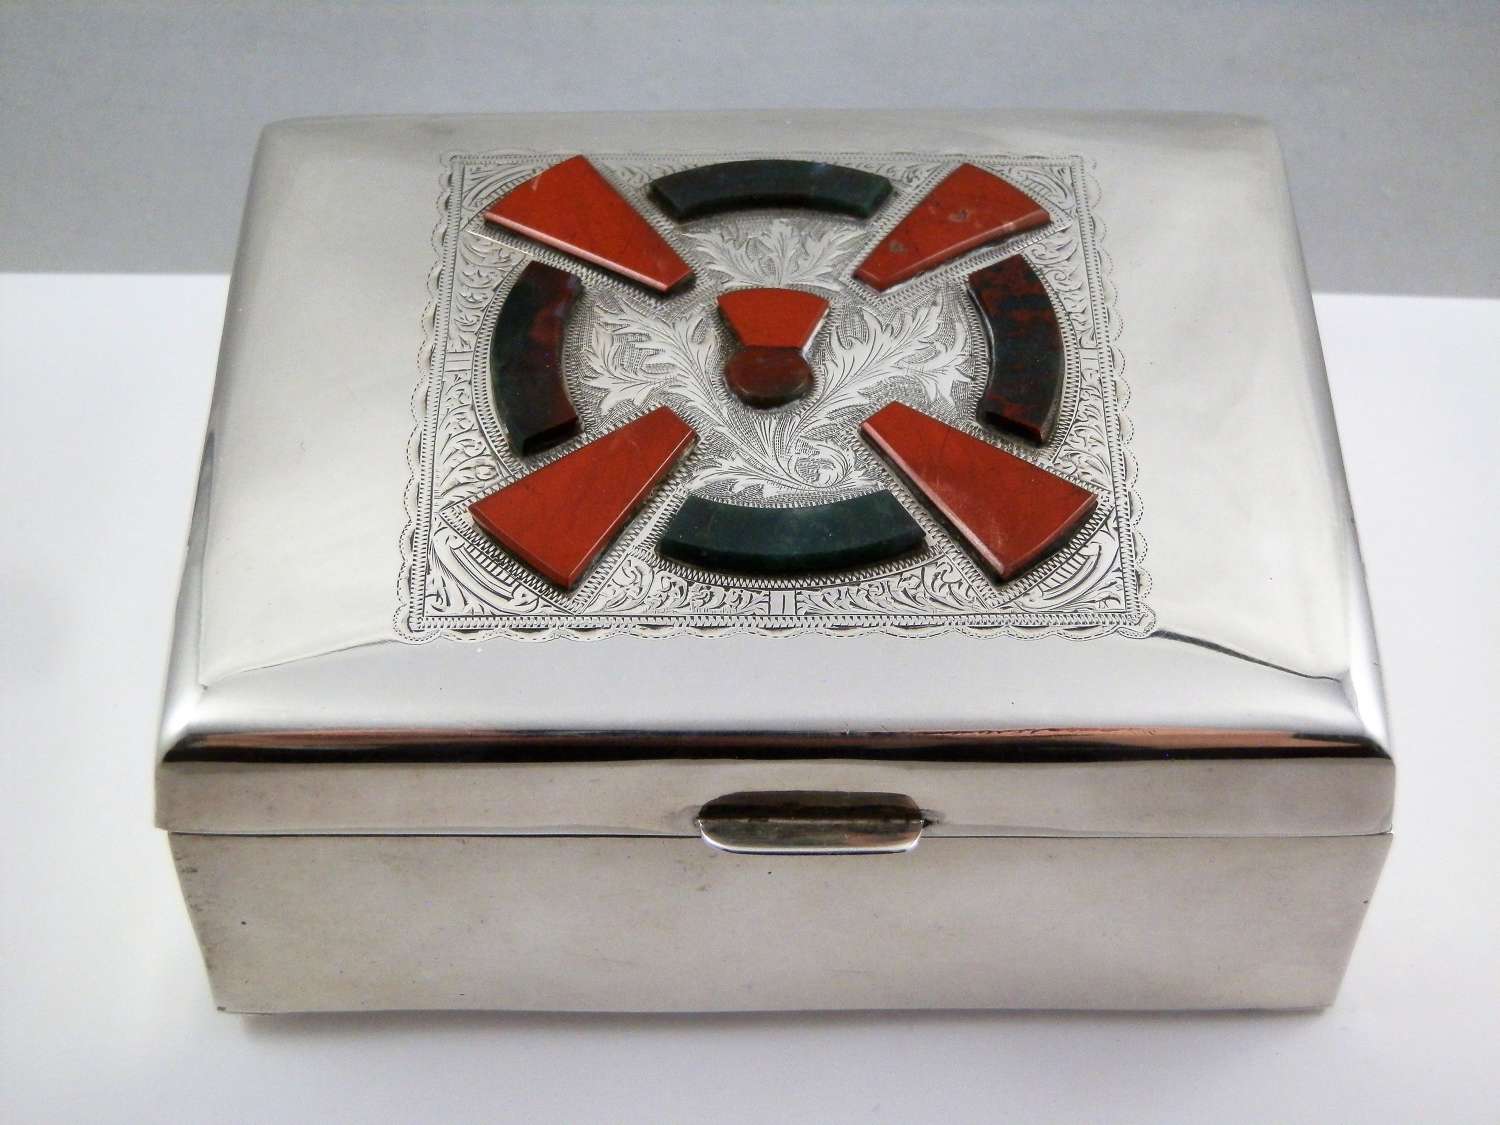 Chester silver trinket box with agates, 1923